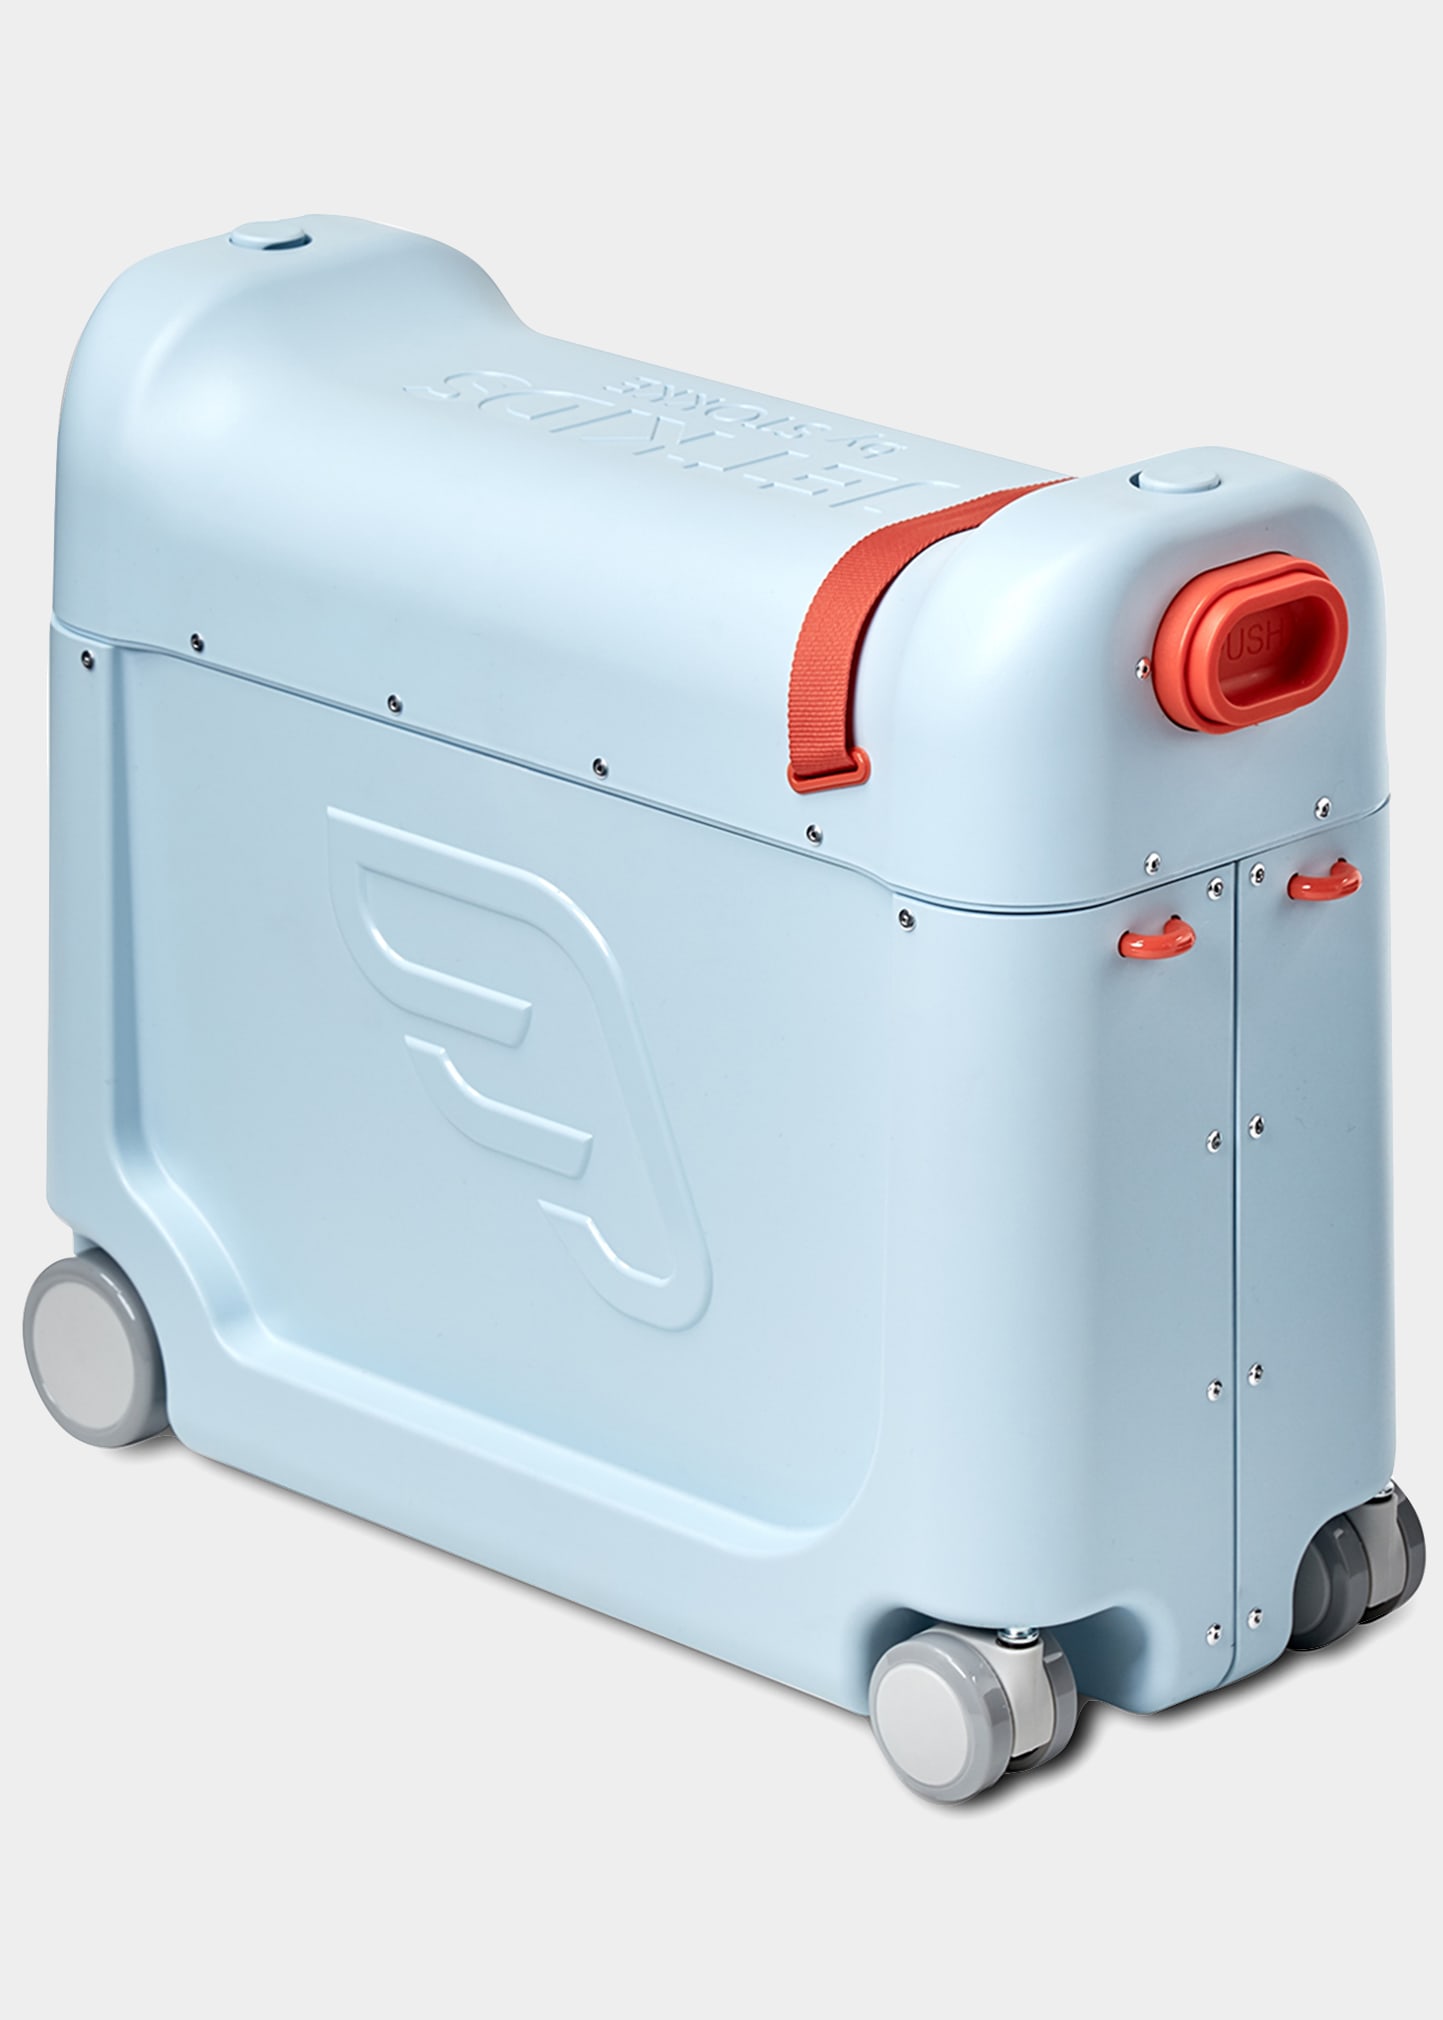 Stokke Bedbox Carry-on Suitcase In Blue